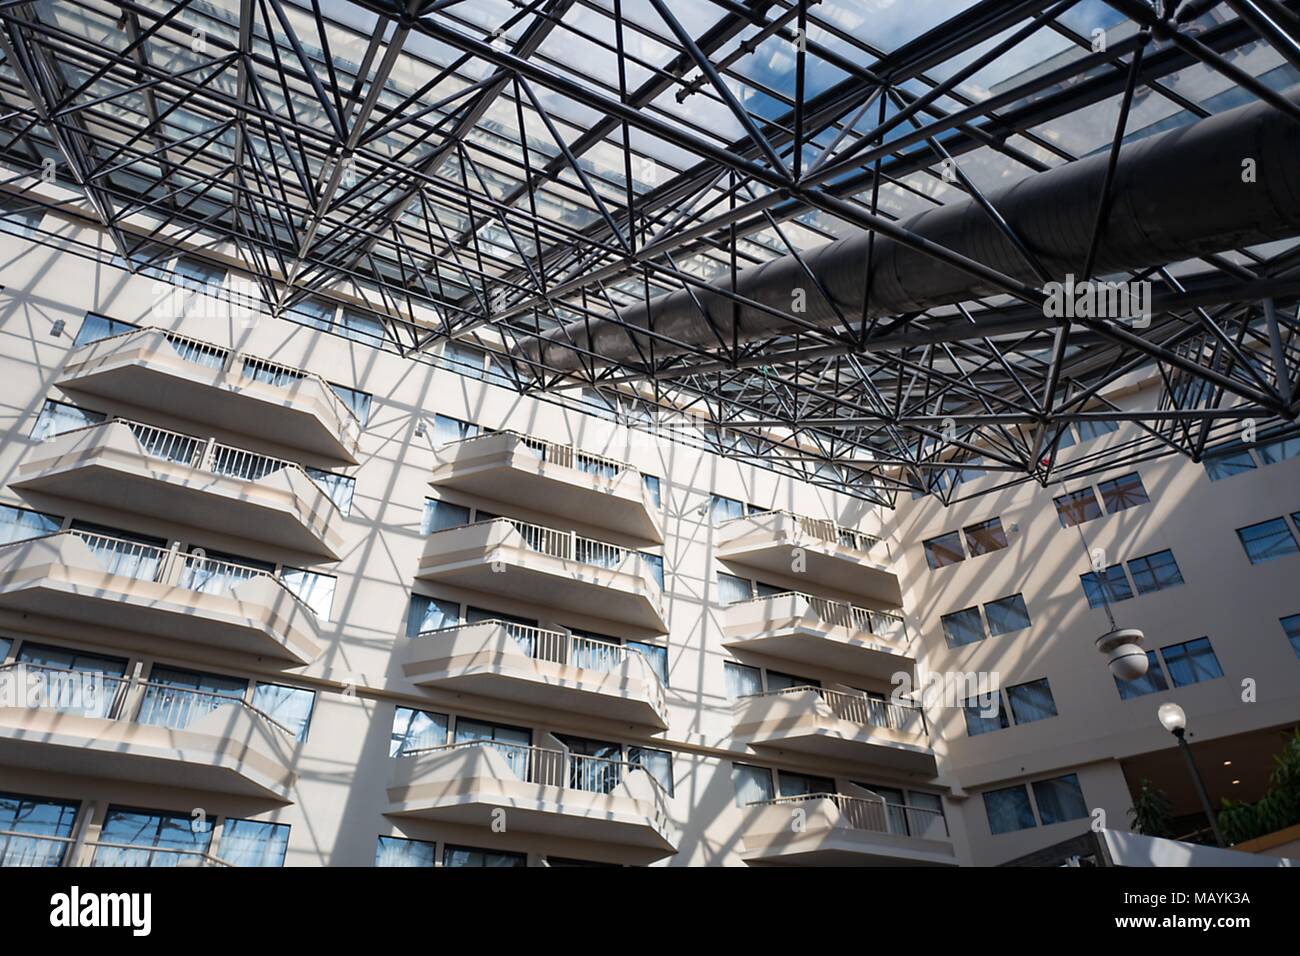 Latticed glass roof and balconies on a sunny day at the Doubletree Newark Airport hotel in Newark, New Jersey, March 16, 2018. () Stock Photo